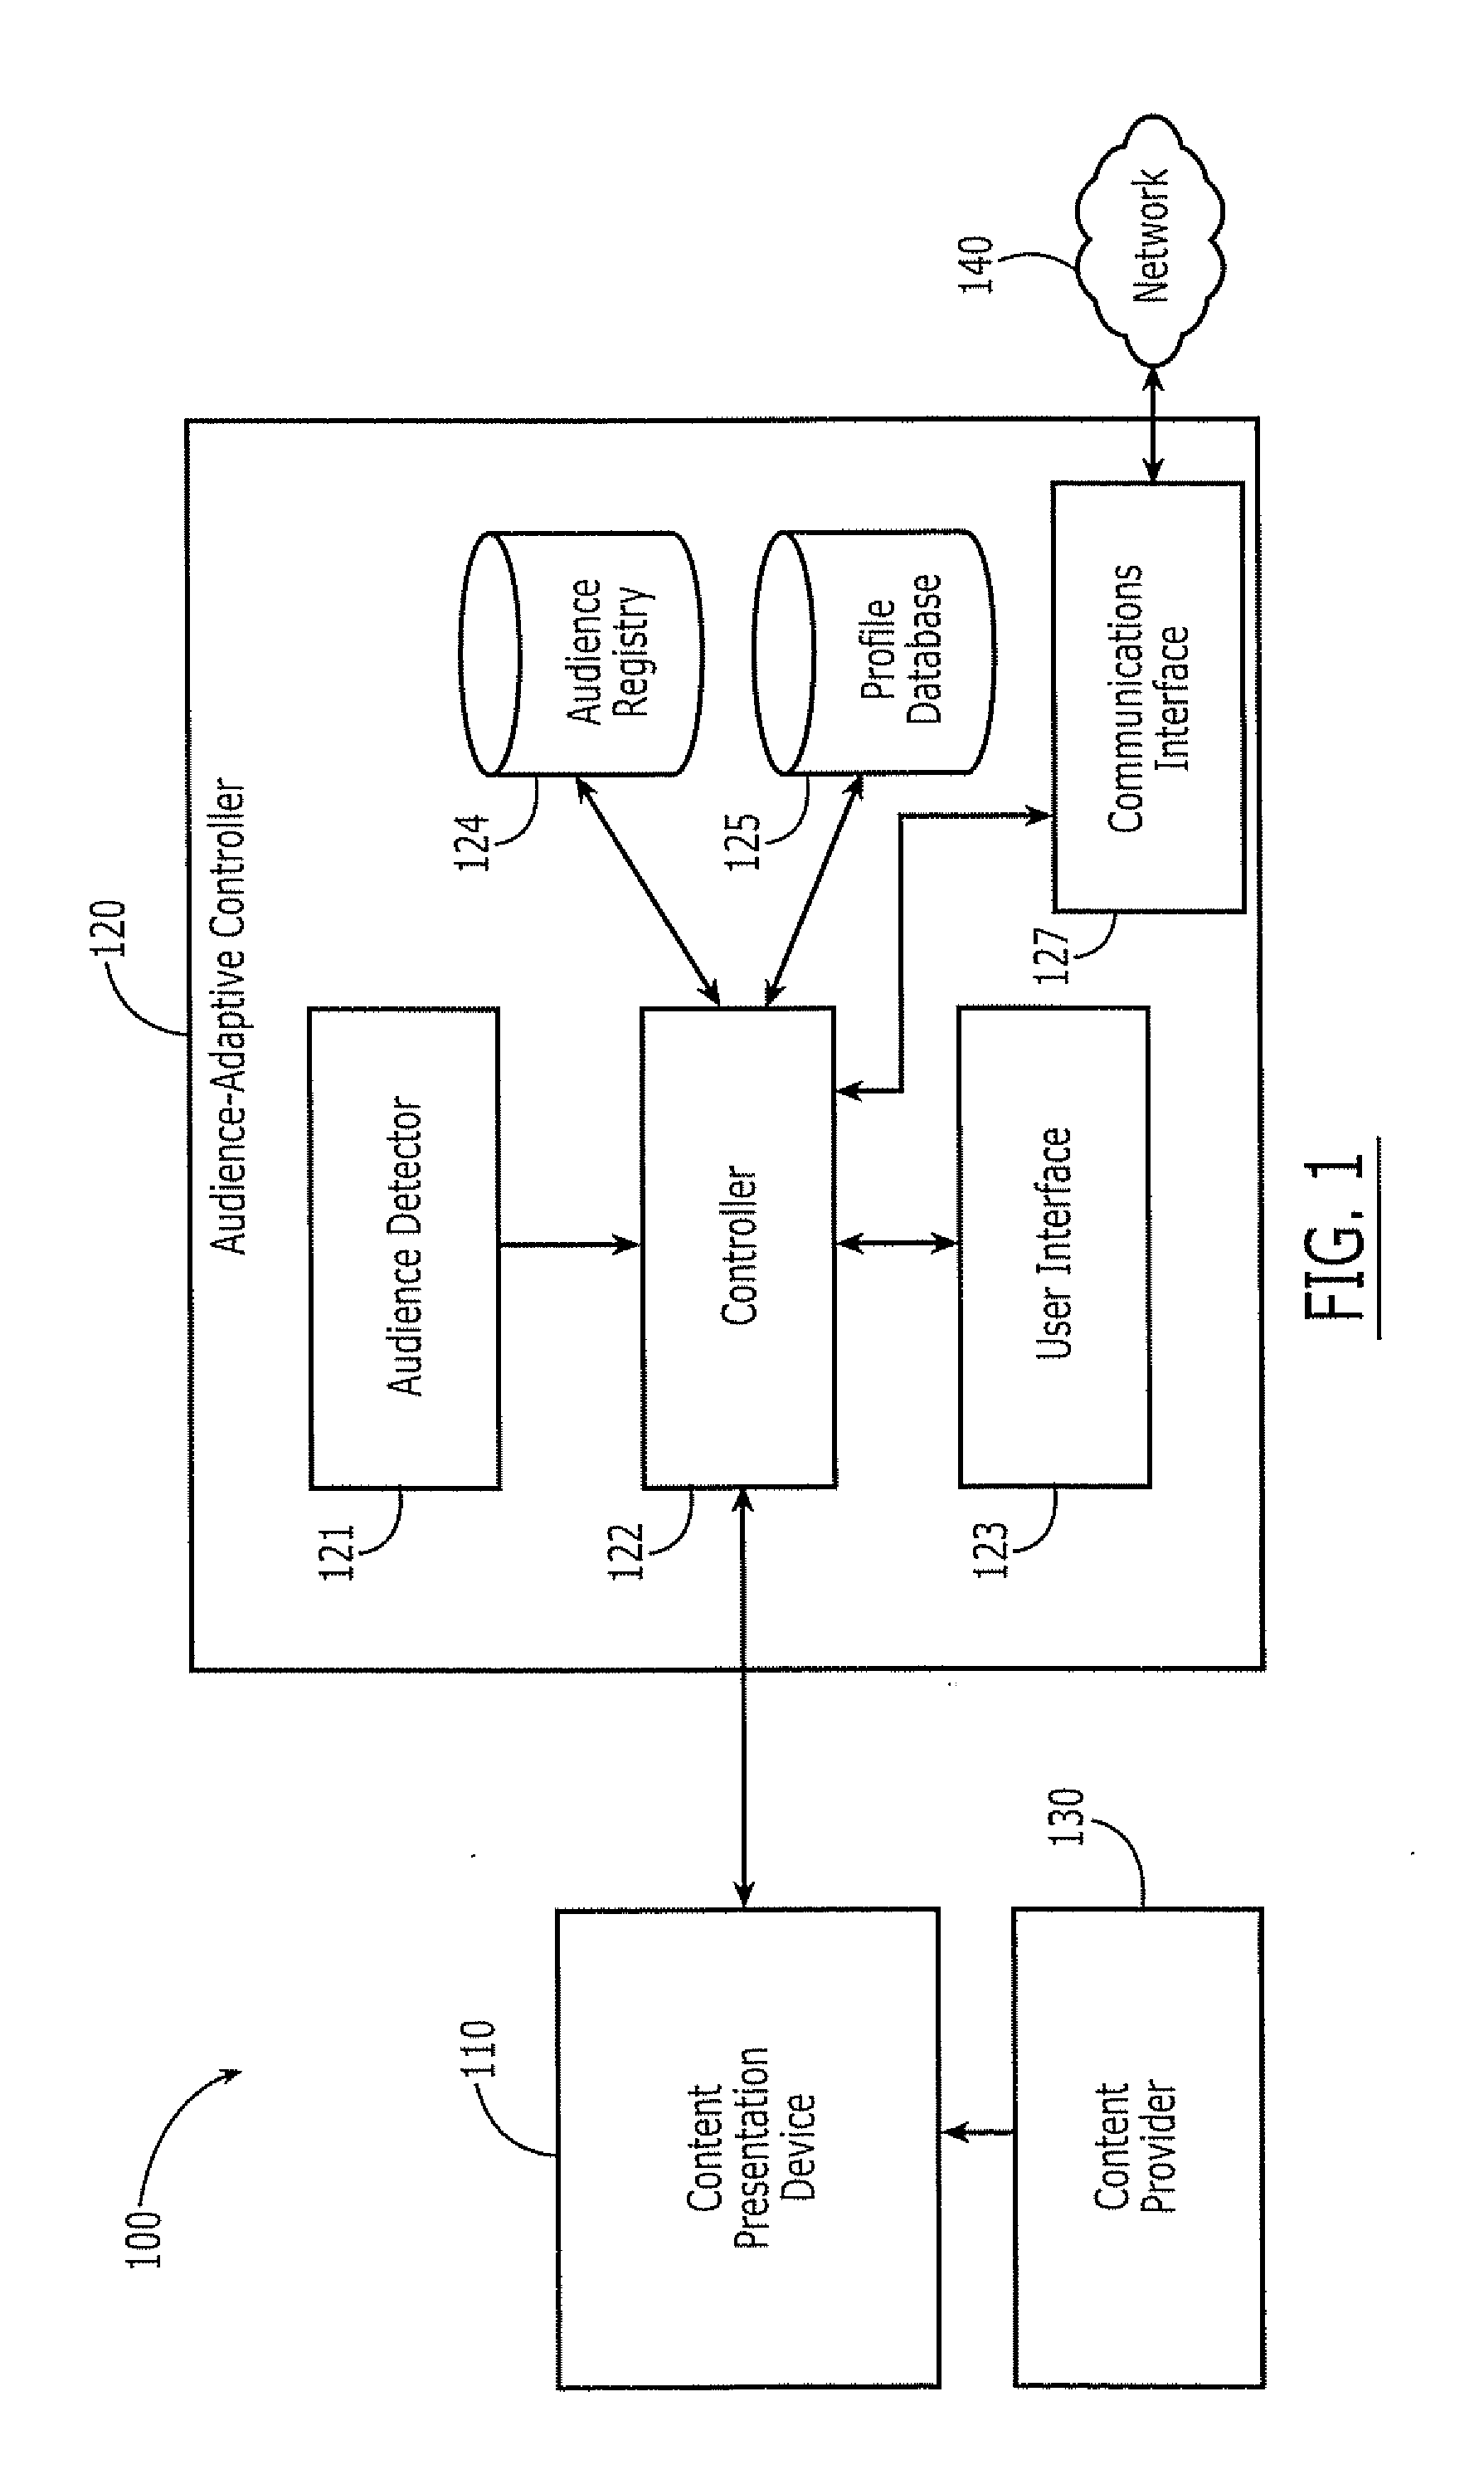 Apparatus, Methods and Computer Program Products for Audience-Adaptive Control of Content Presentation